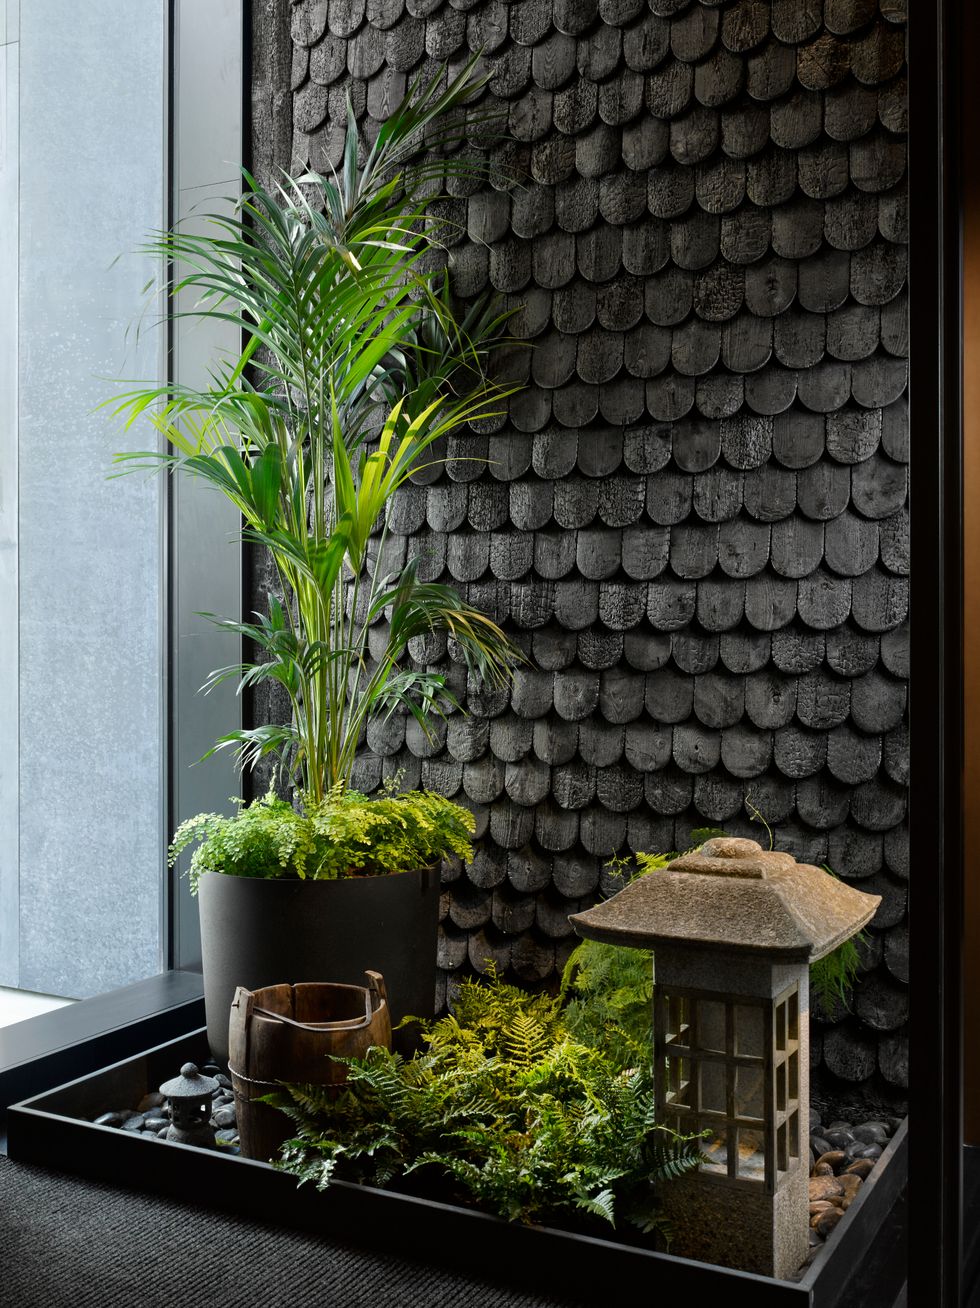 Houseplant, Wall, Plant, Flowerpot, Window, Tree, Herb, House, Room, Architecture, 